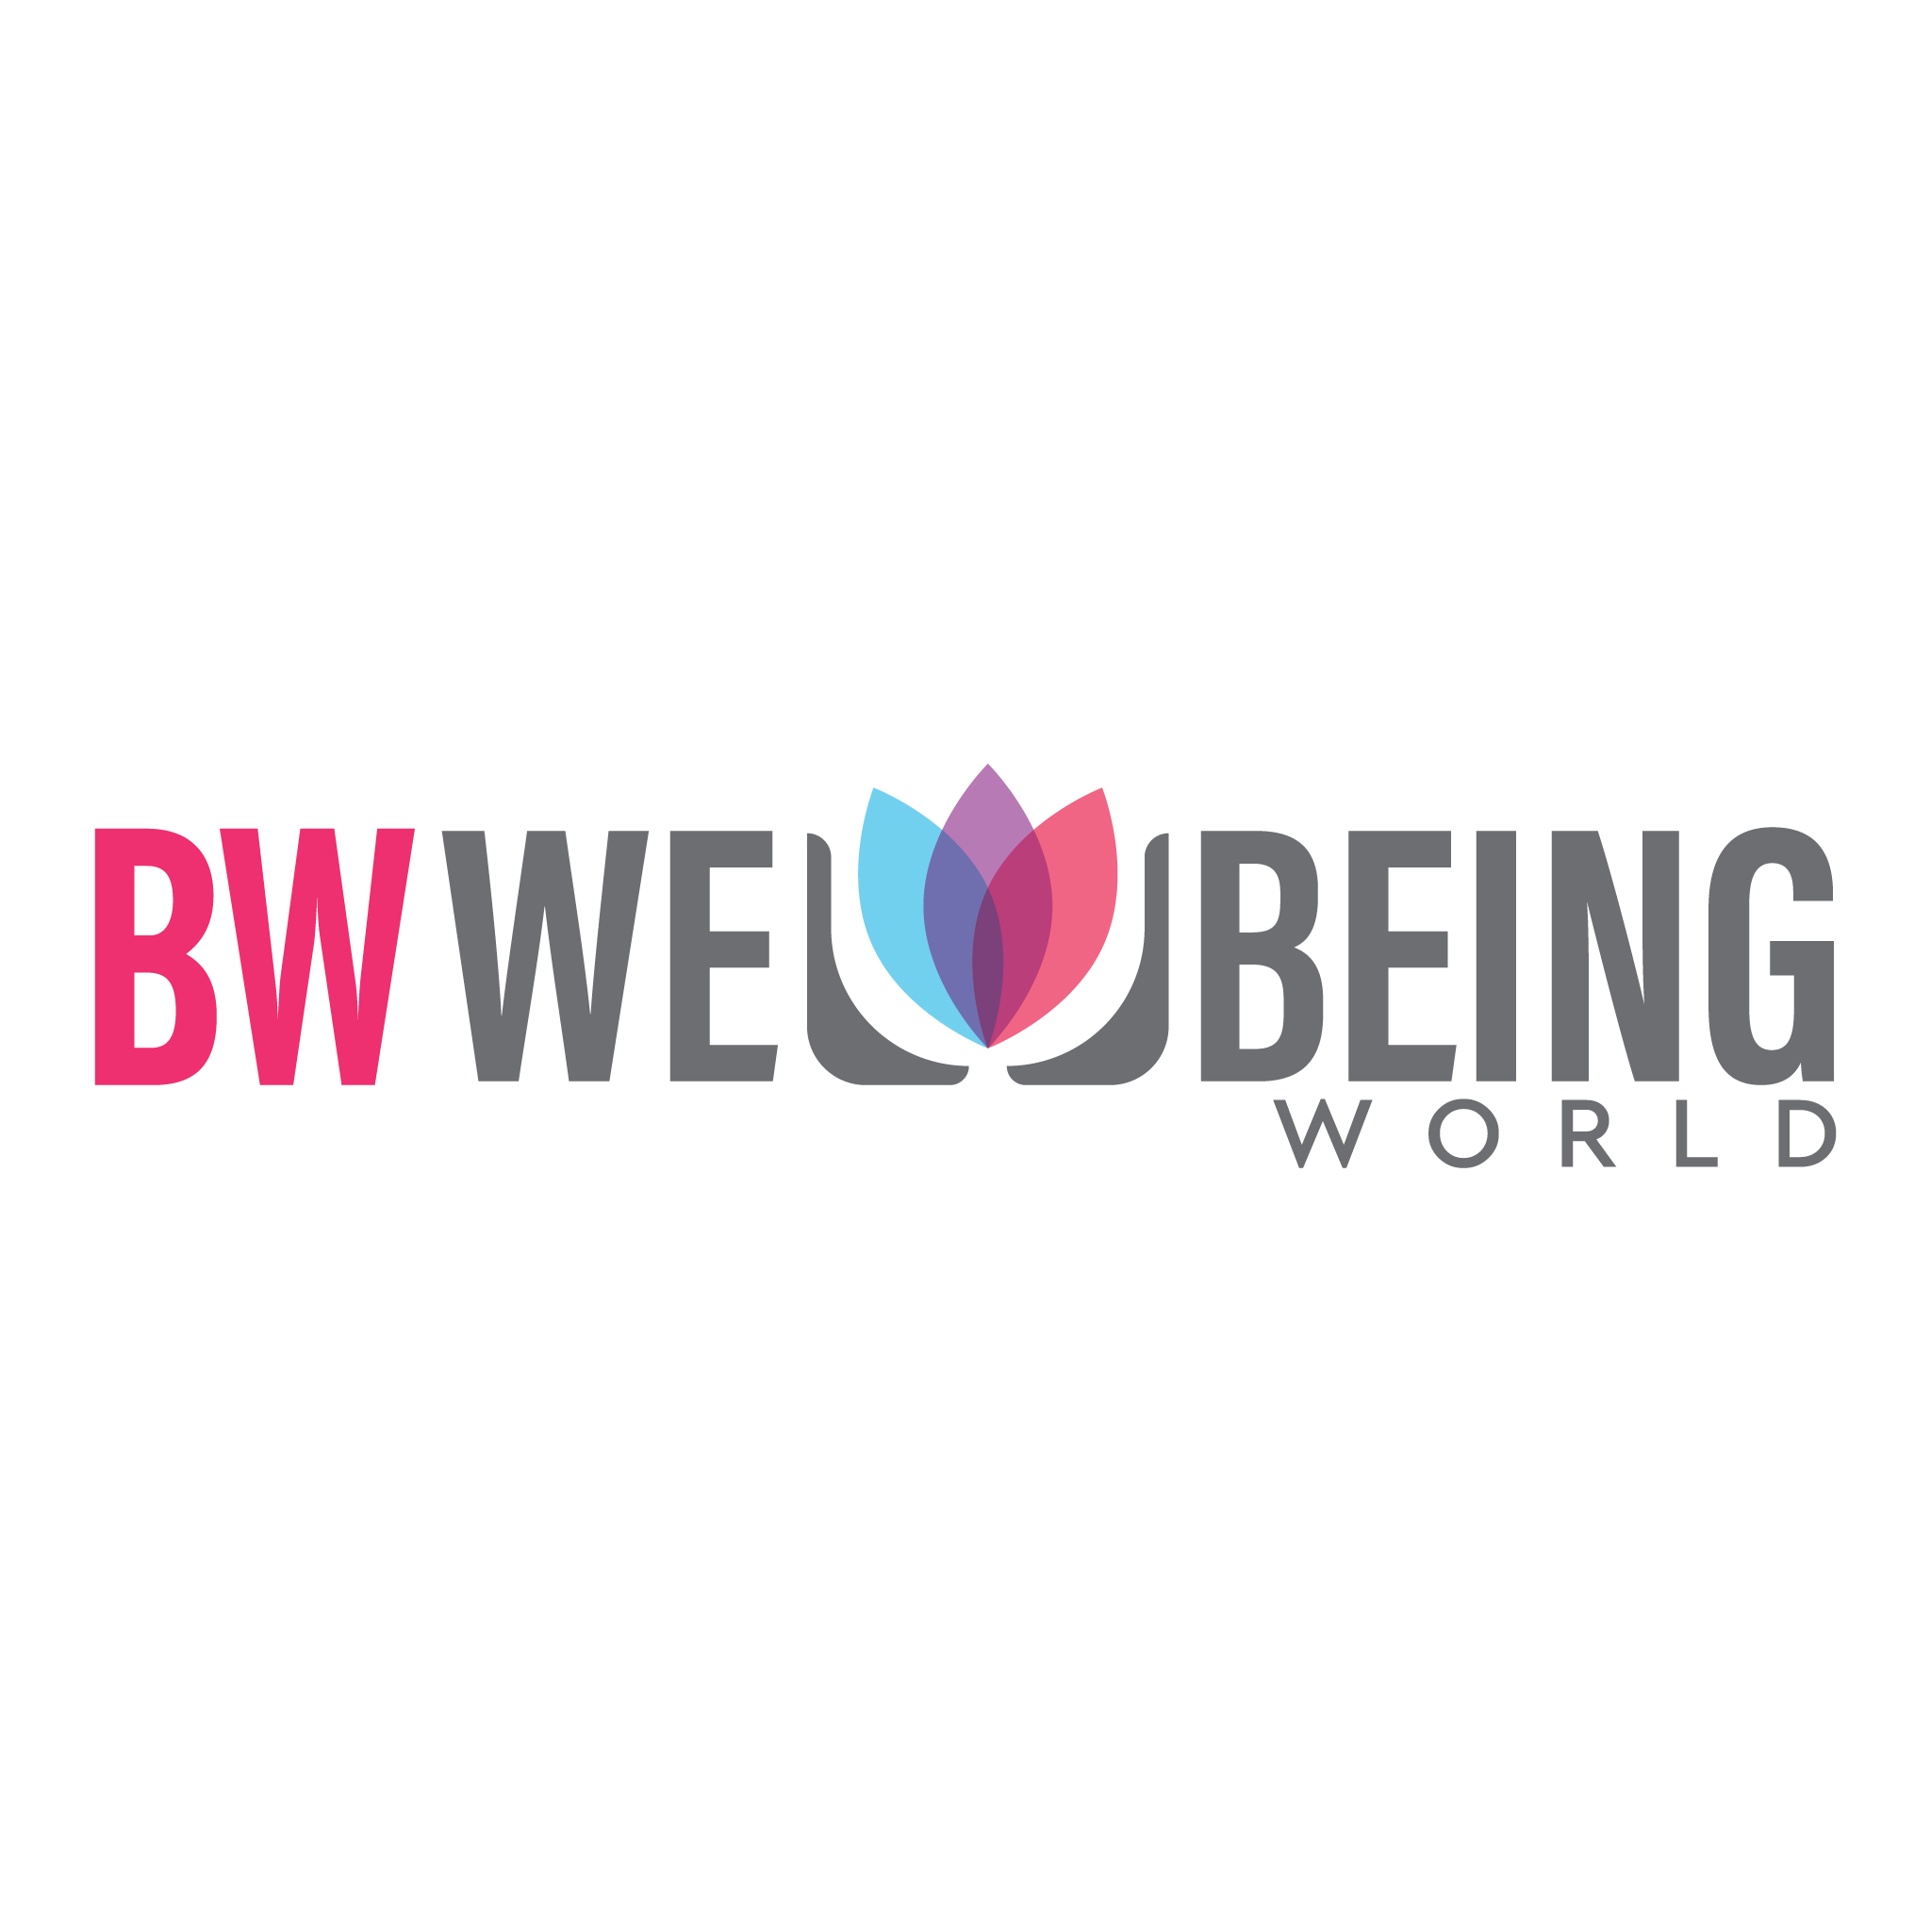 BW Wellbeing